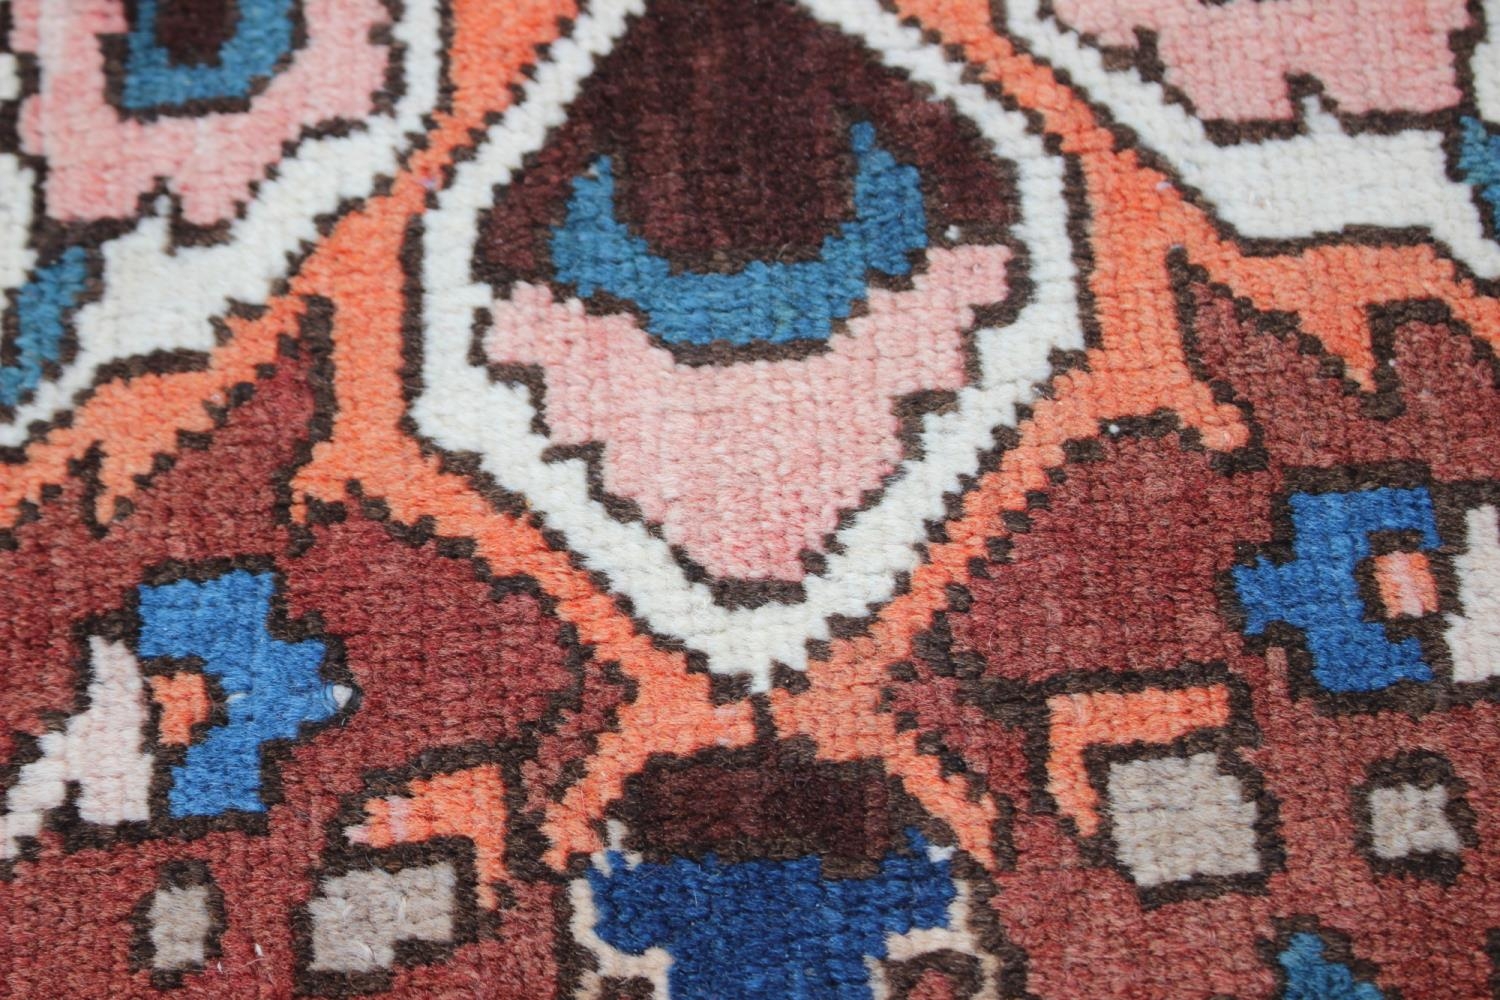 A Hamadan carpet with central star design, on a salmon ground, in shades of blue, brown, pink, - Image 7 of 14